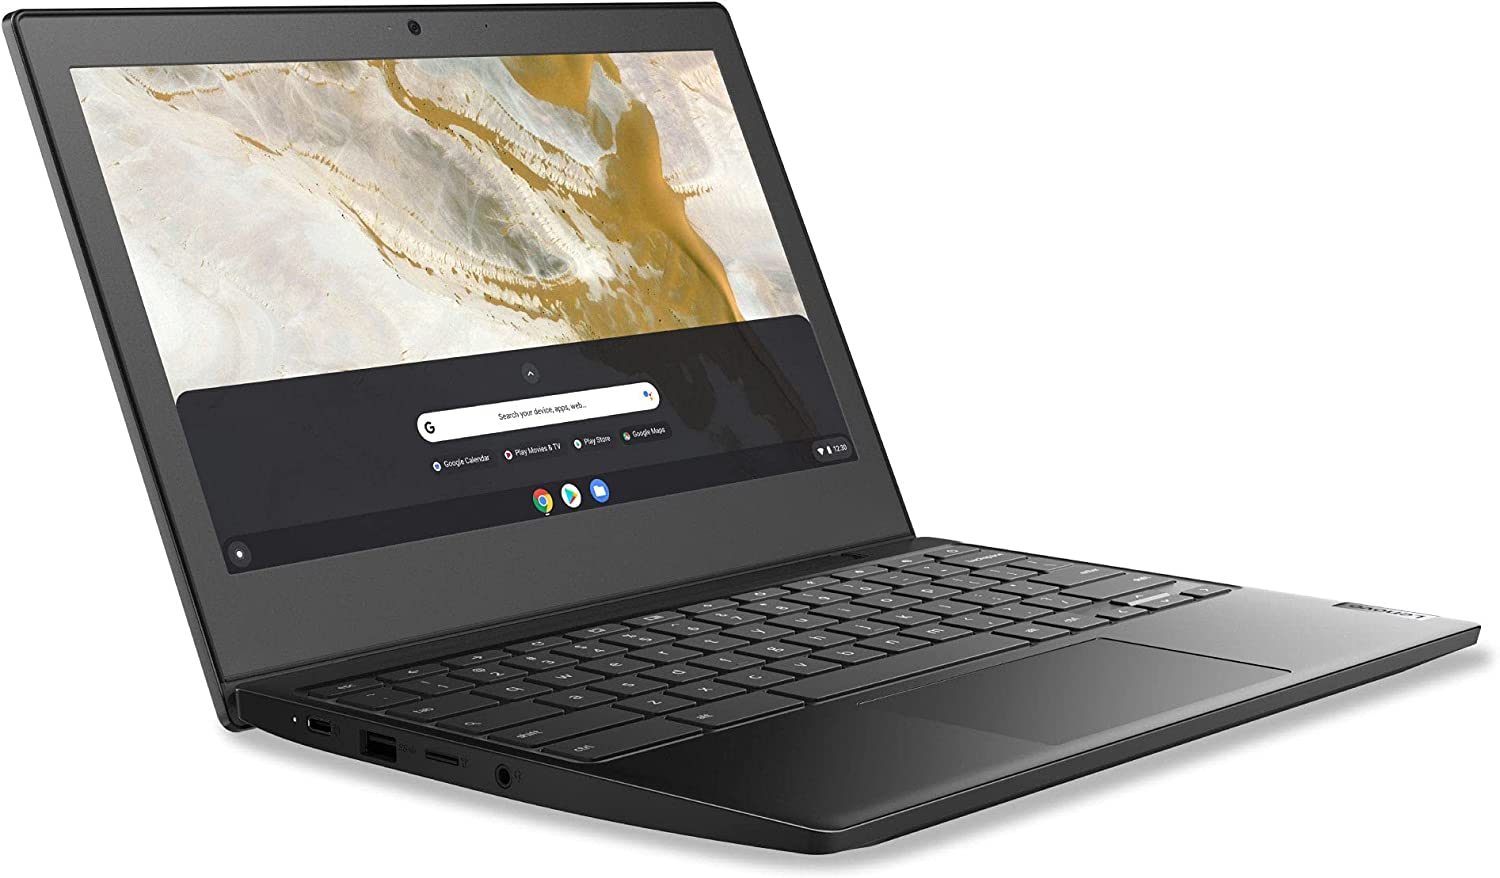 inexpensive laptop review